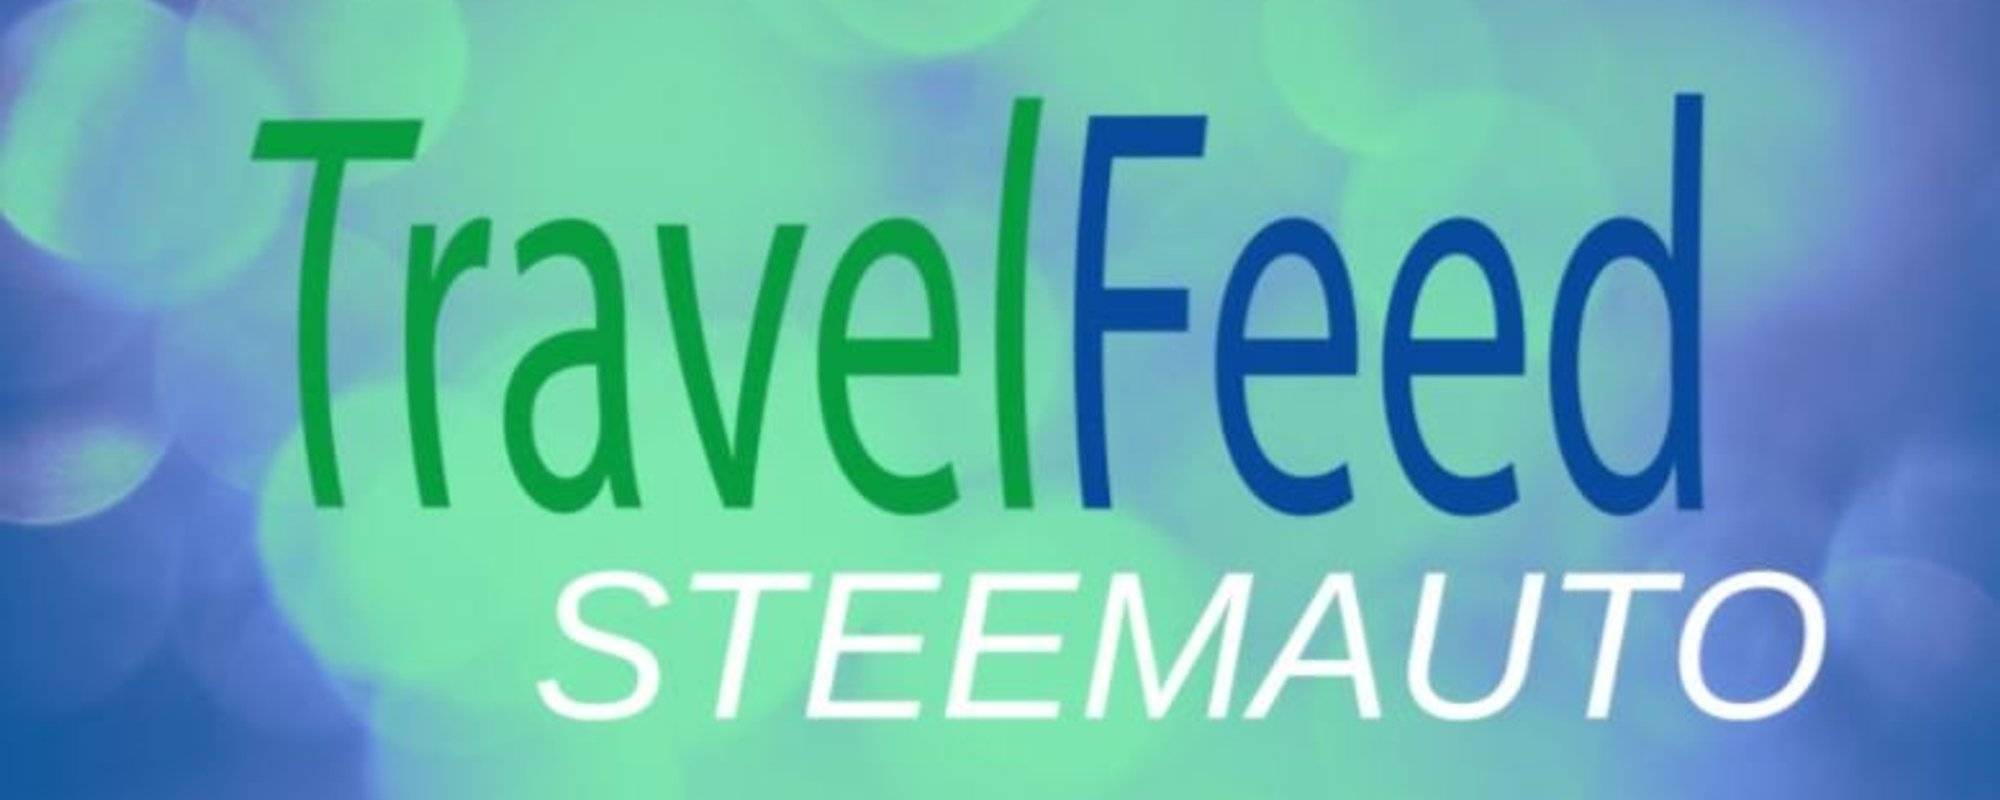 Tutorial: Follow the TravelFeed Curation Trail on Steemauto!